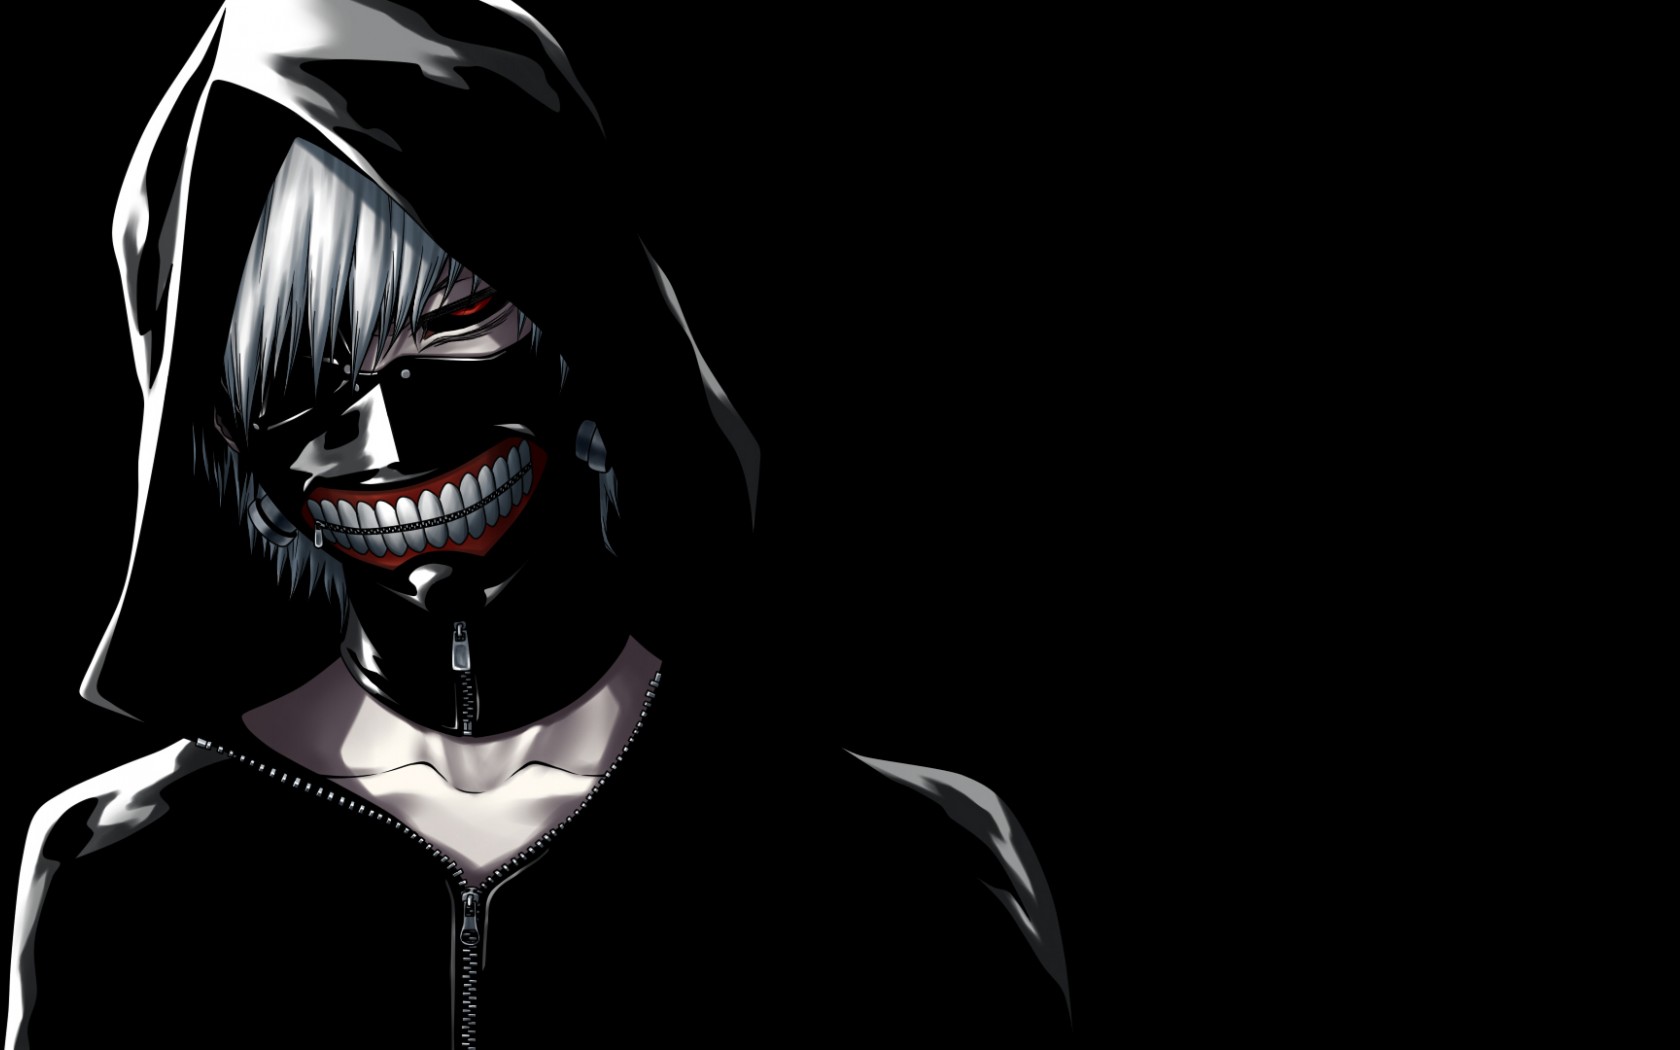 best anime wallpaper hd,fictional character,supervillain,darkness,black and white,illustration